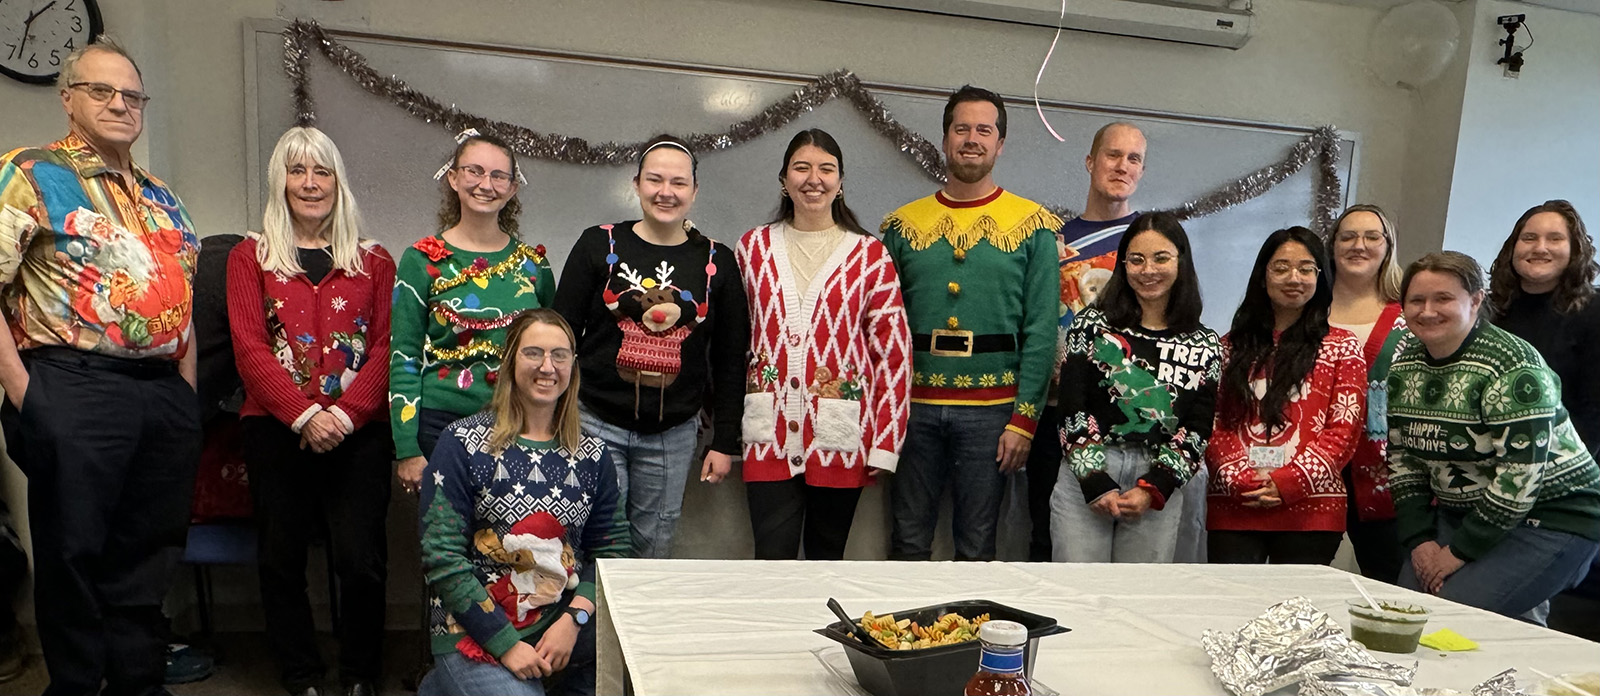 Thirteen people standing and one sitting in front, all wearing 'ugly' Christmas sweaters